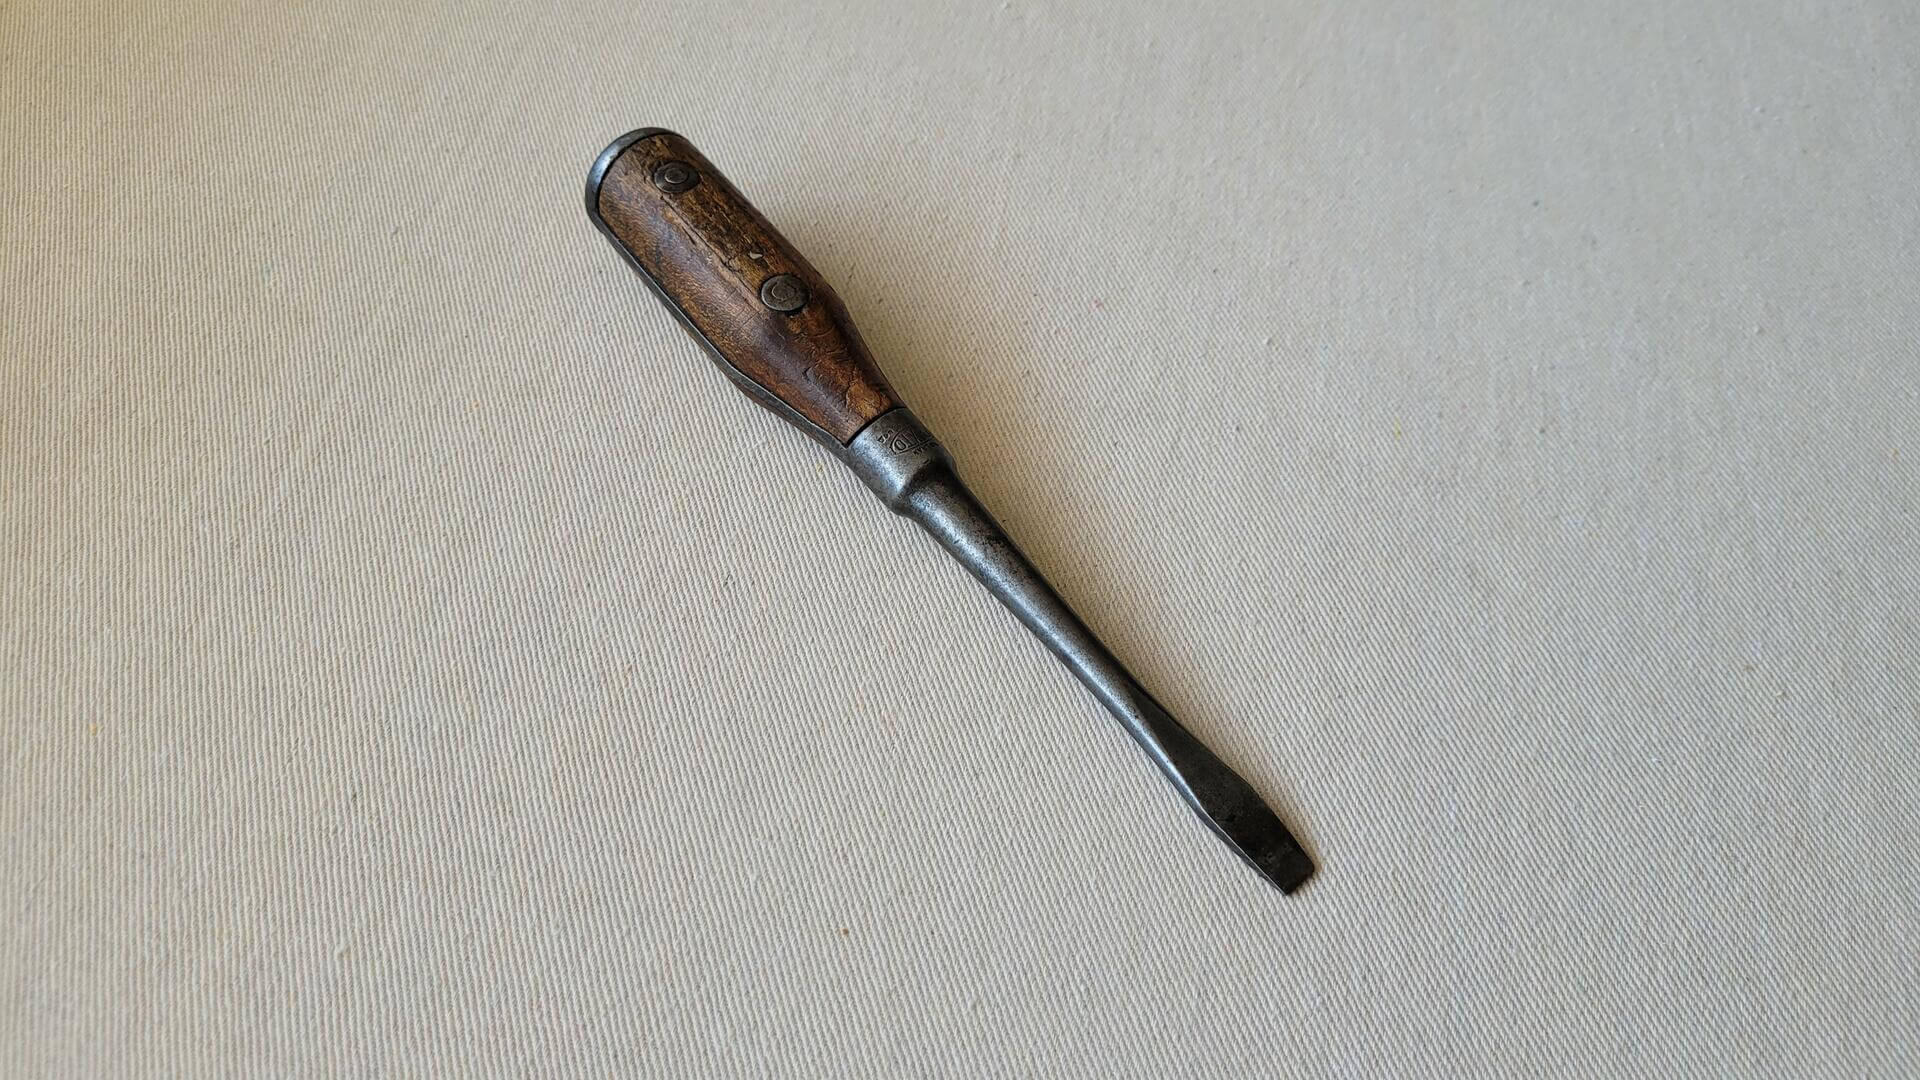 Beautiful vintage Pexto No 4 perfect split wood handle flat head screwdriver. Fine antique made in USA collectible carpentry and woodworking hand tools